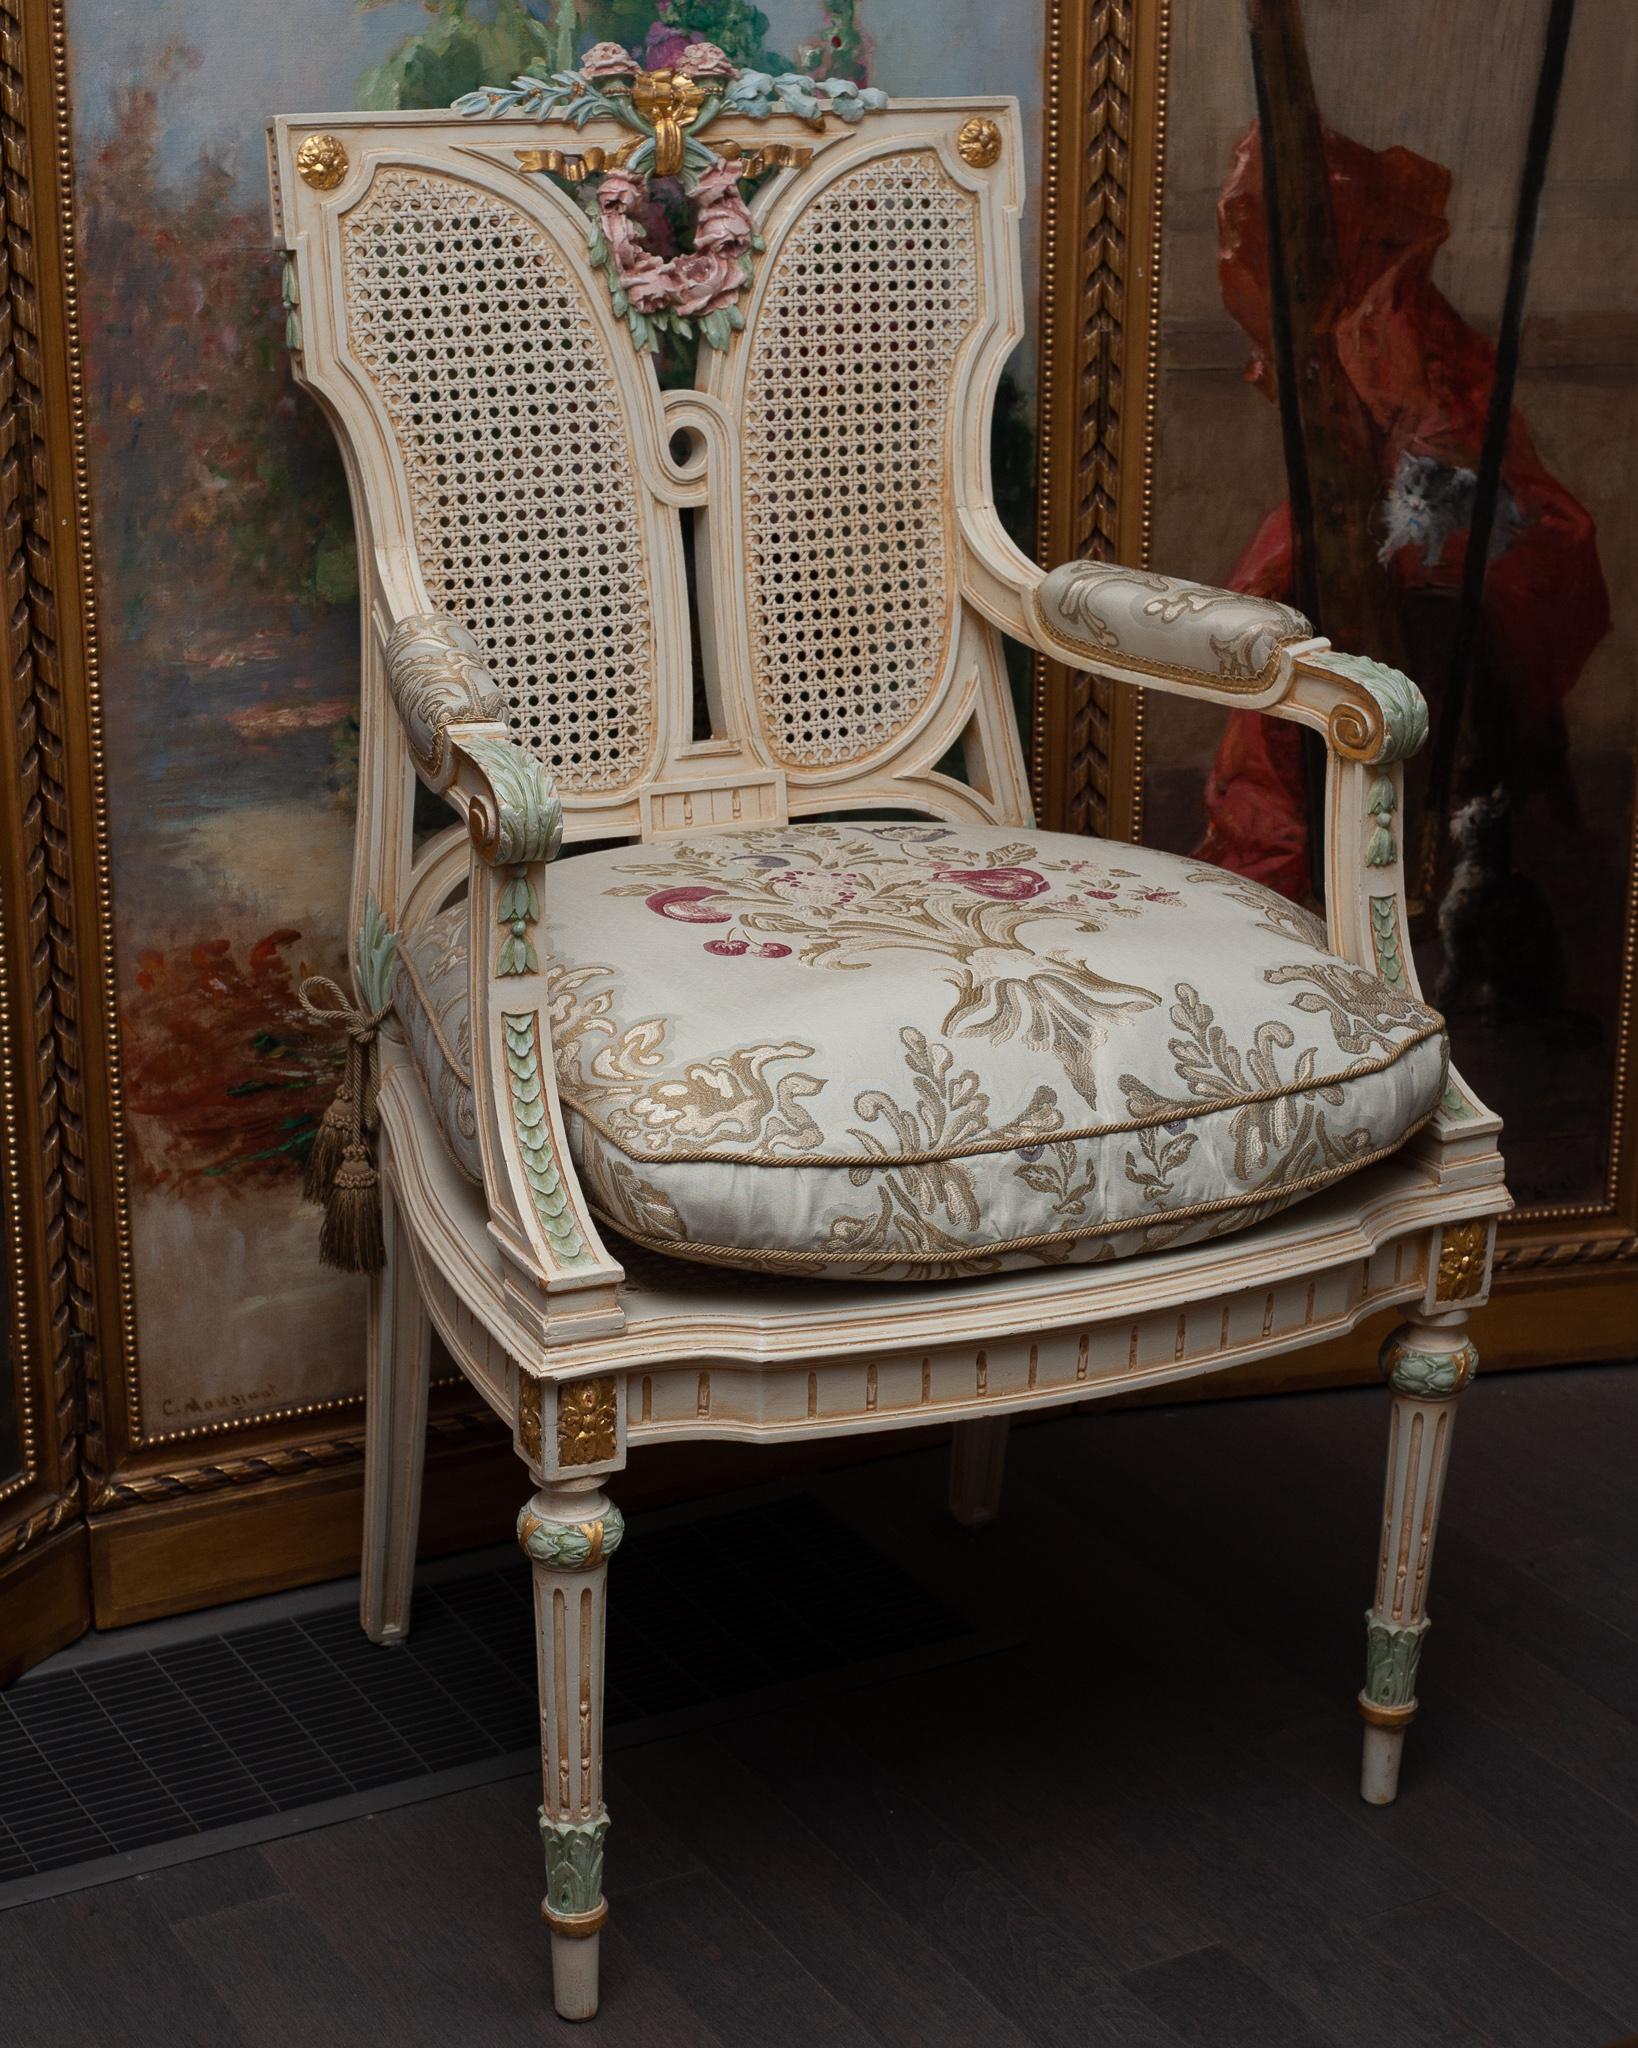 A stunning carved antique French hand painted chair, reupholstered with brocade fabric and metallic trim. Fully panelled in woven cane webbing through the back and seat. Hand carved and painted, the fine craftsmanship of this piece is what makes